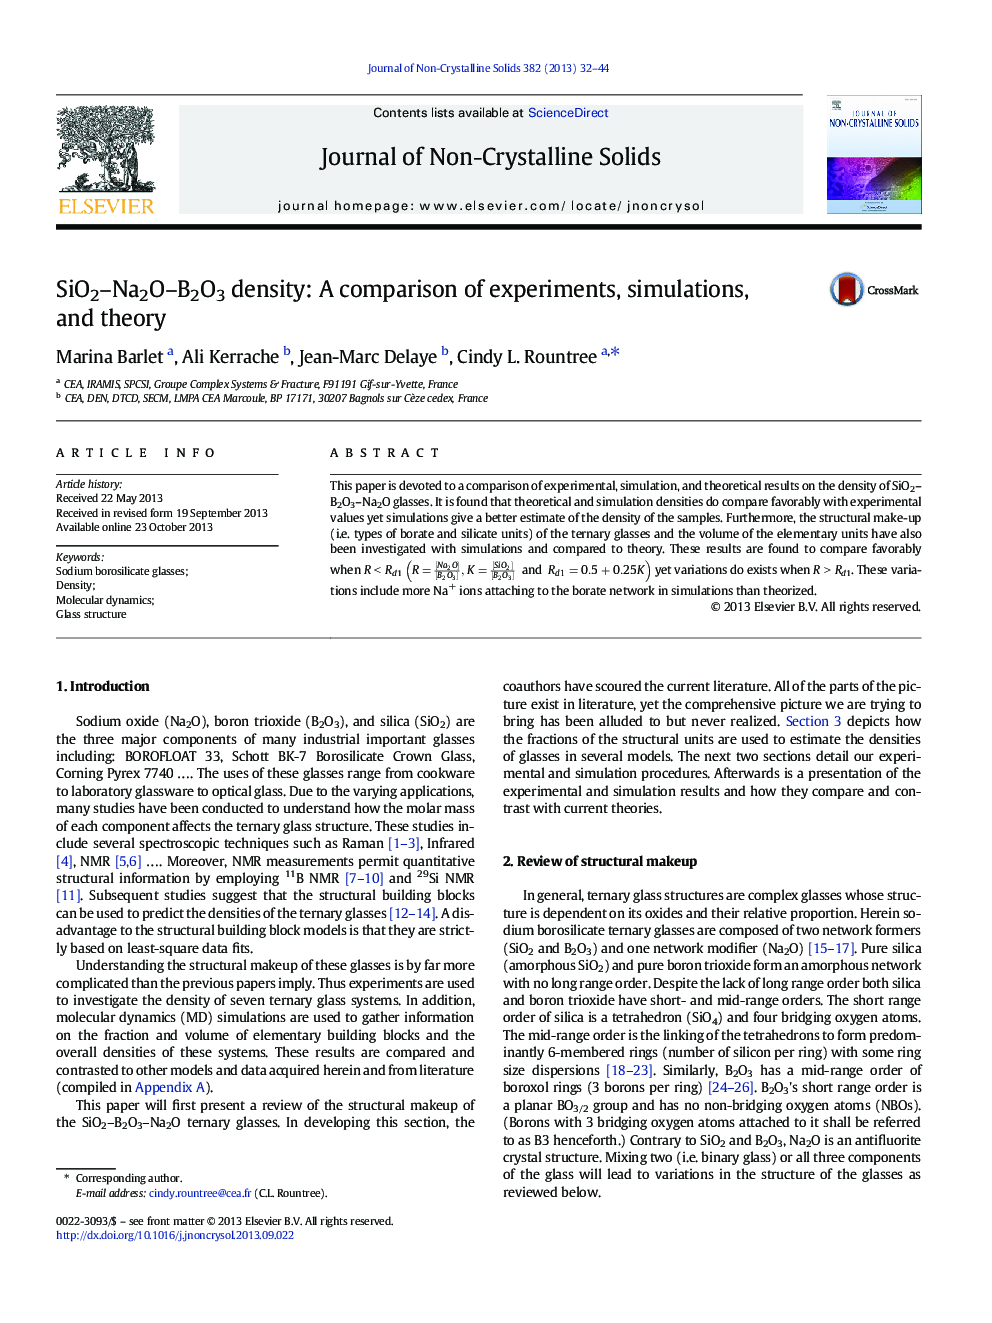 SiO2–Na2O–B2O3 density: A comparison of experiments, simulations, and theory